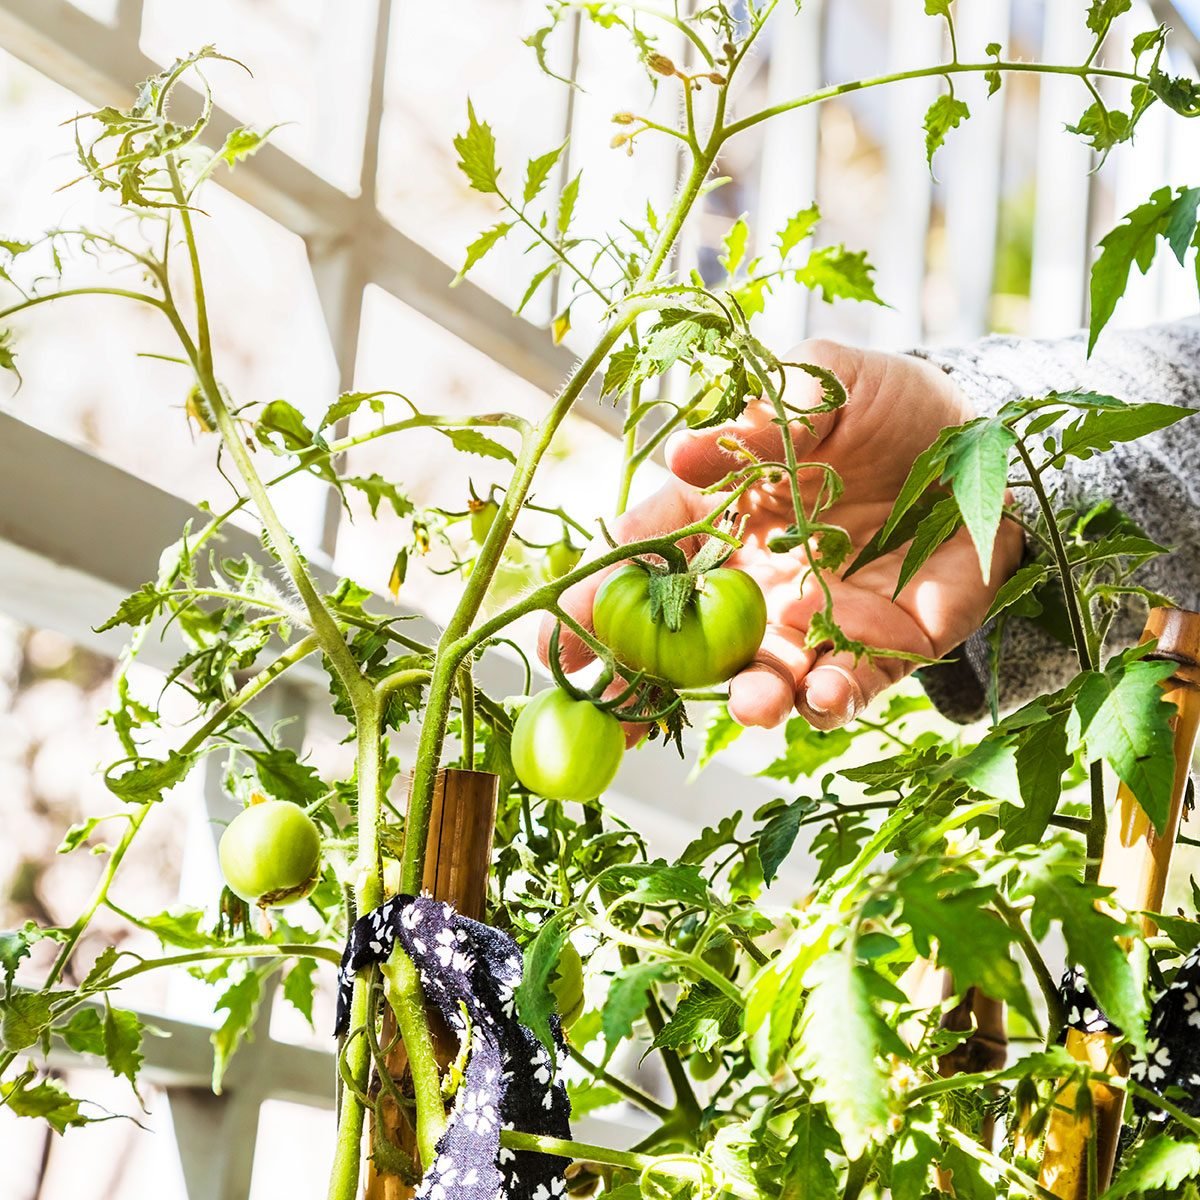 How To Grow Fruits and Vegetables Indoors Year-Round